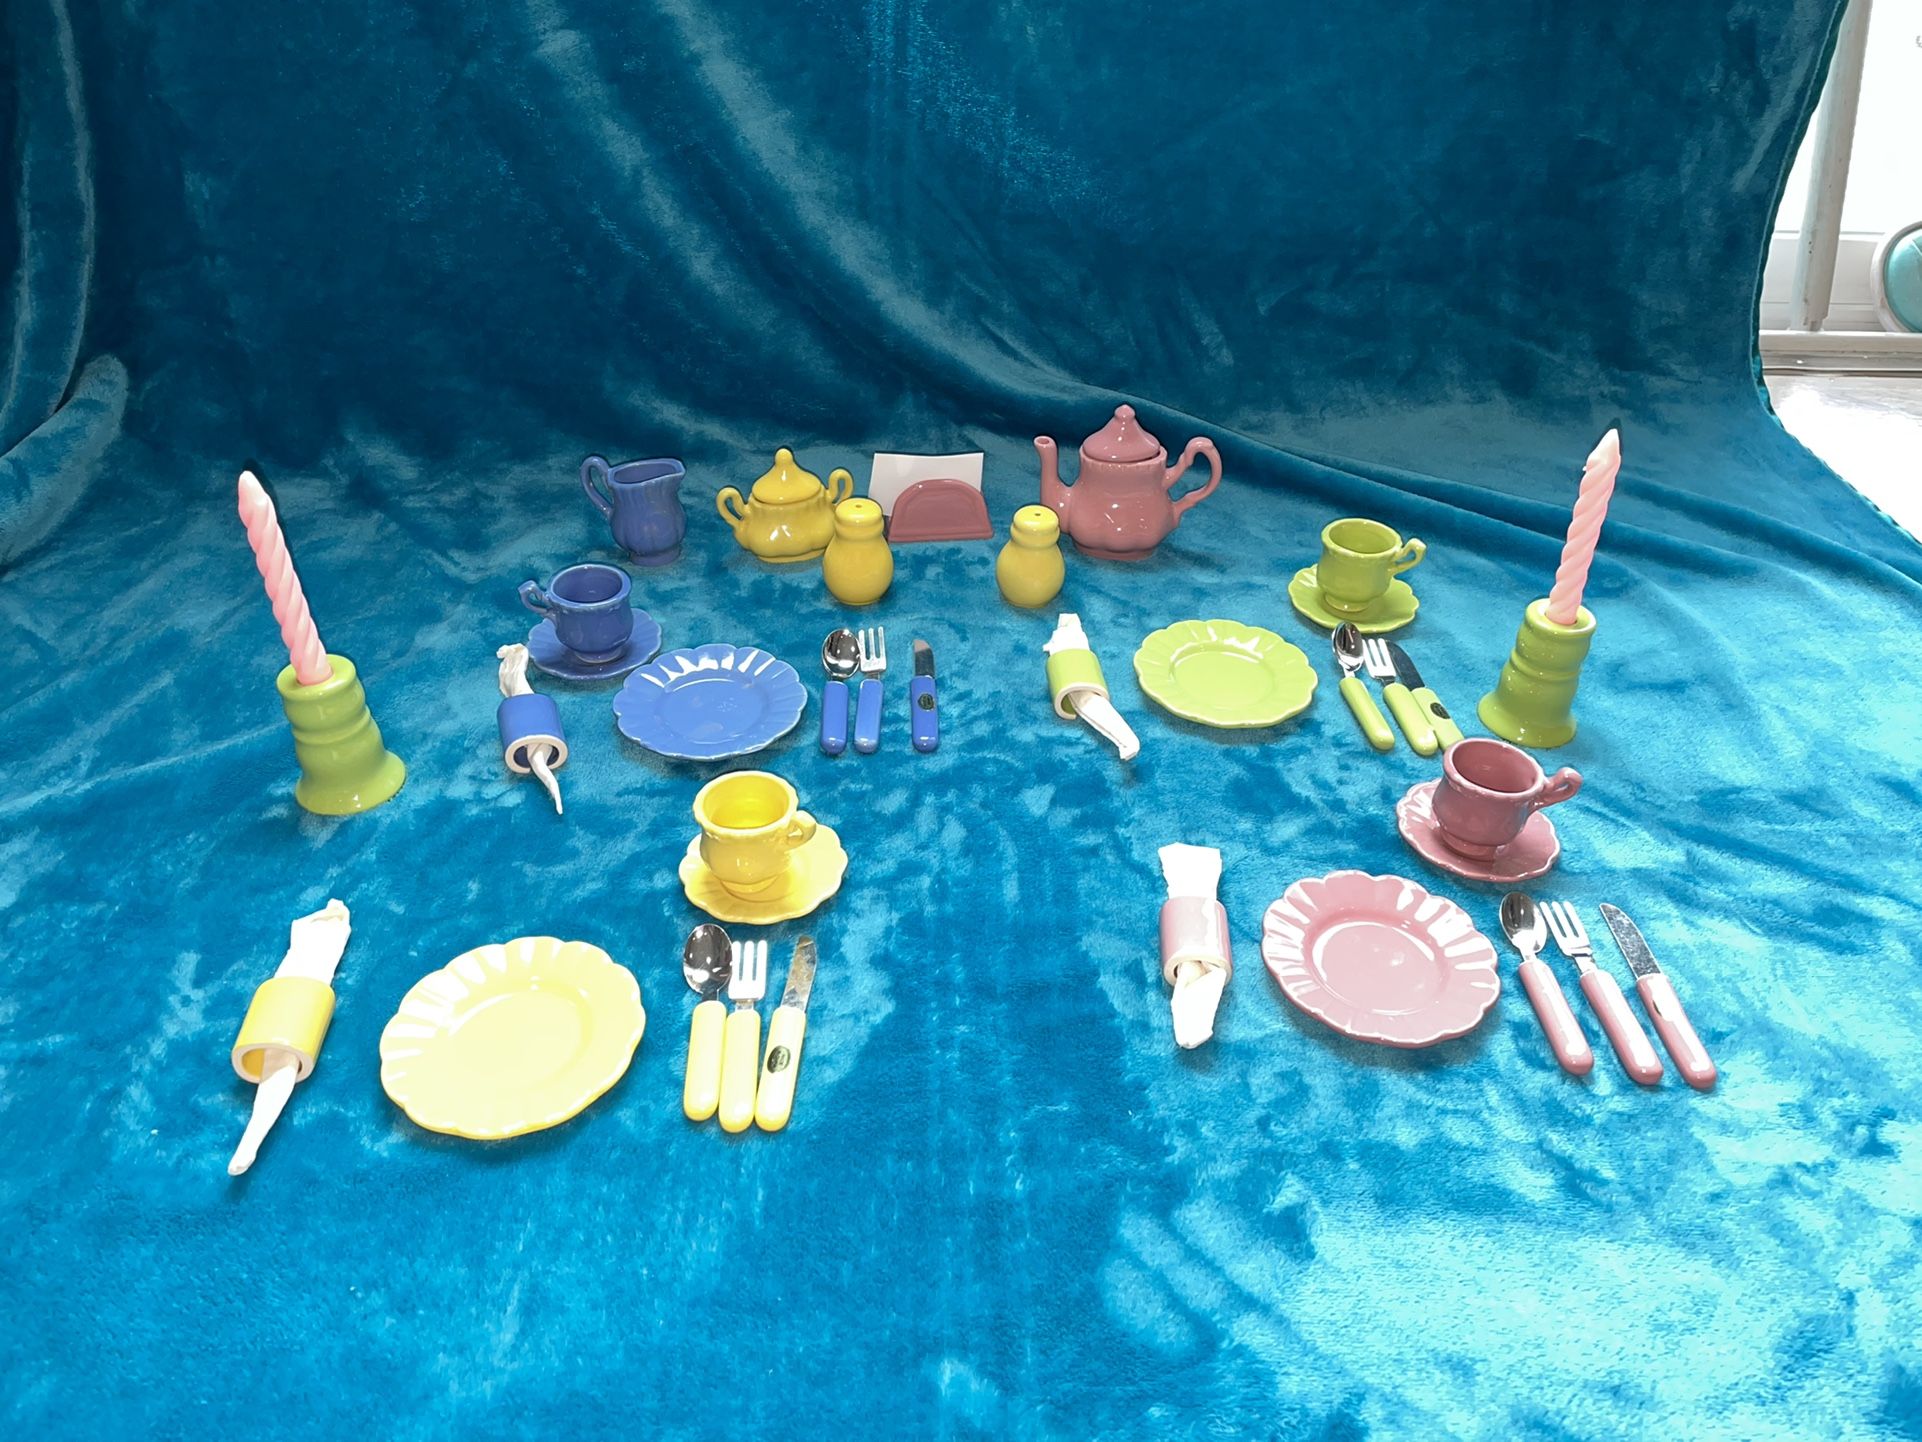 ***REDUCED***Vintage Fiesta Frenzy 50 pc Ceramic Toy Tea Set For Child Or Doll